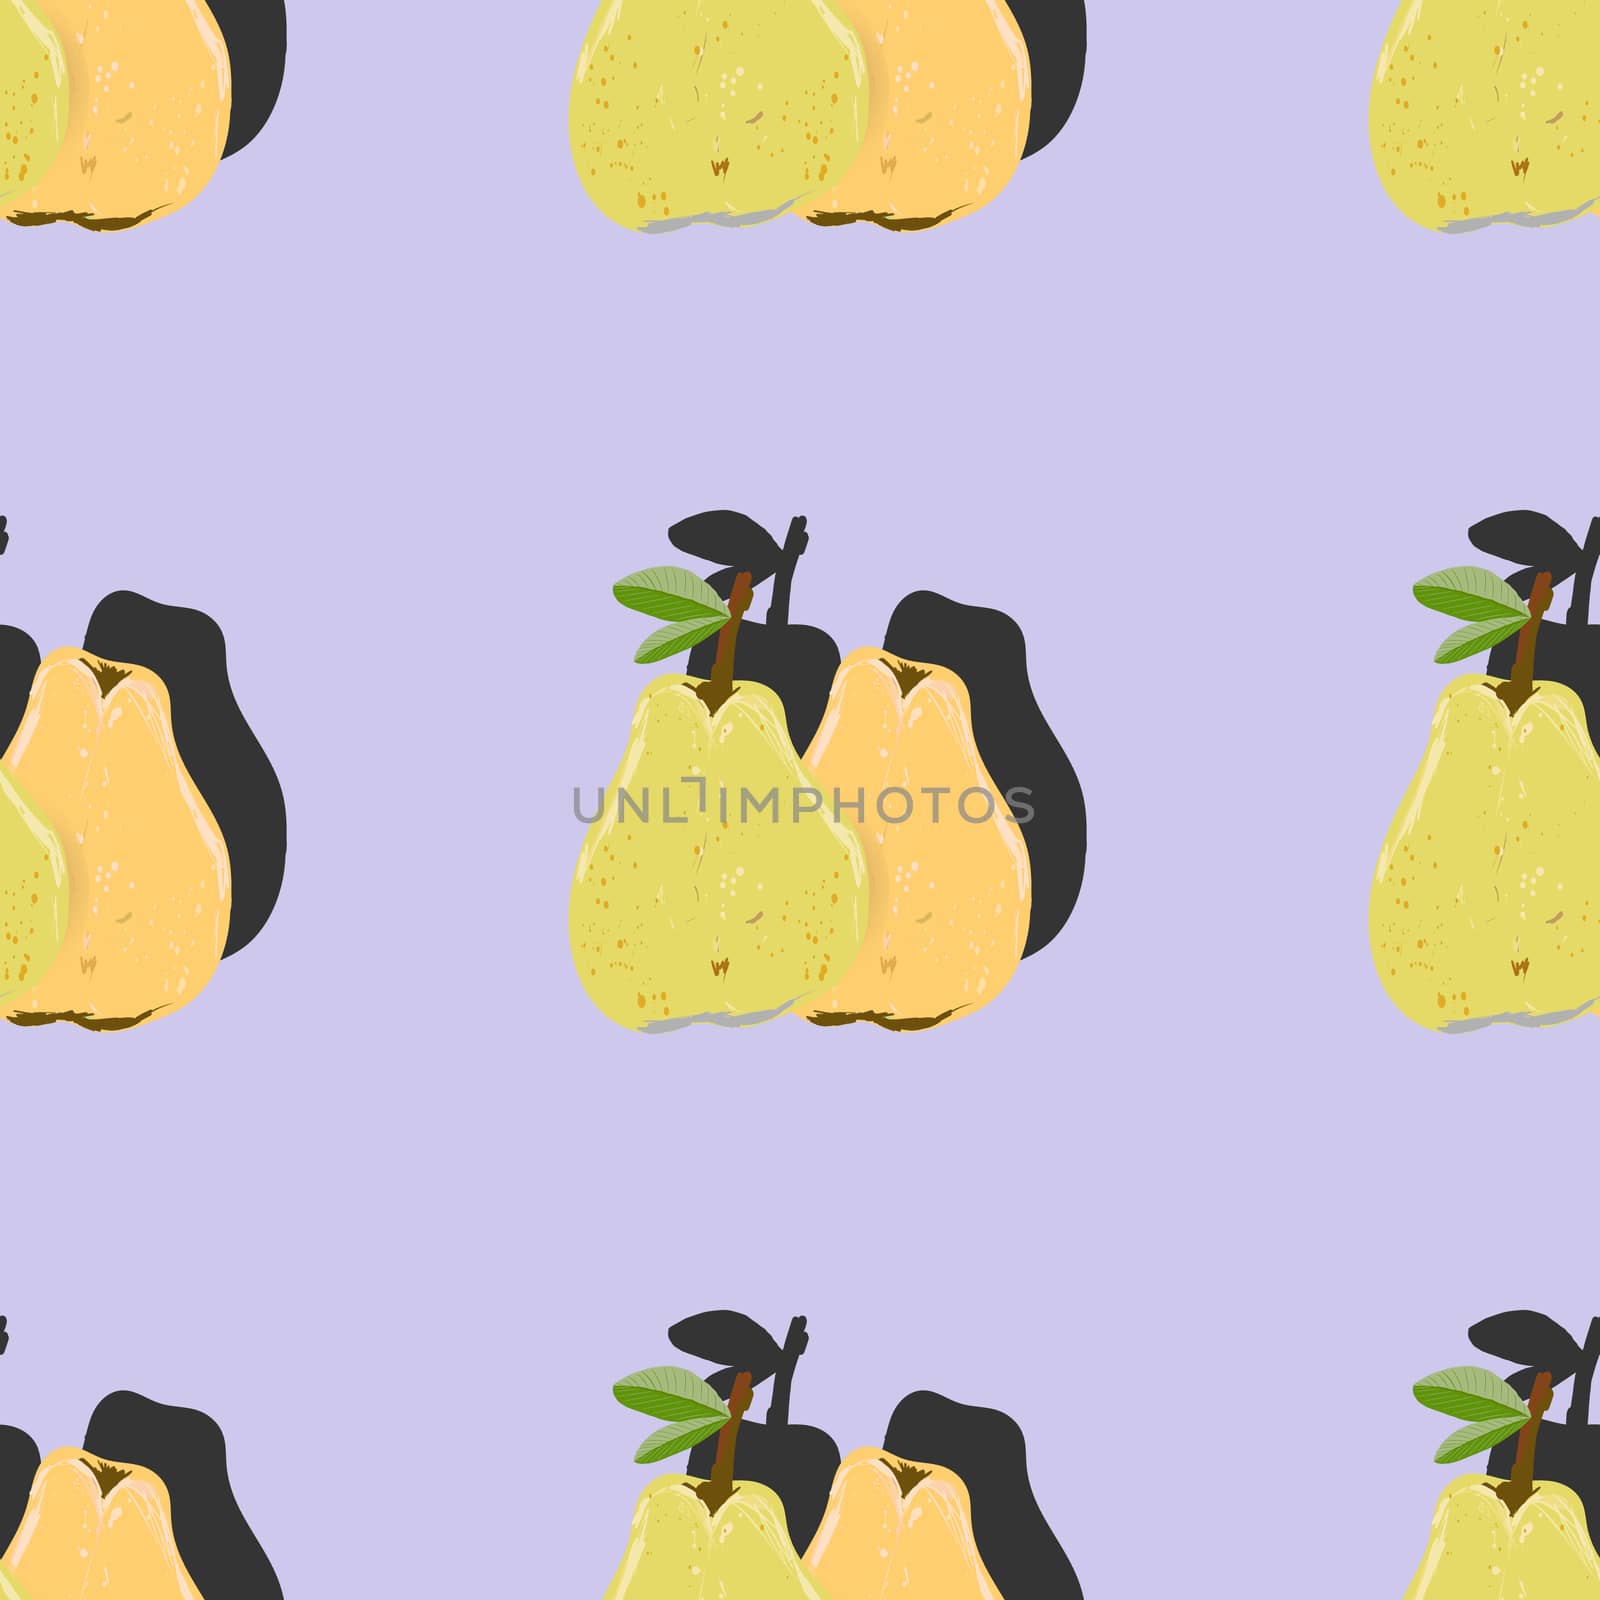 Orange and green pear top view pop art with shadow seamless pattern on lilac background. Summer fruit endless design for wallpapers, fabrics, textiles, packaging.